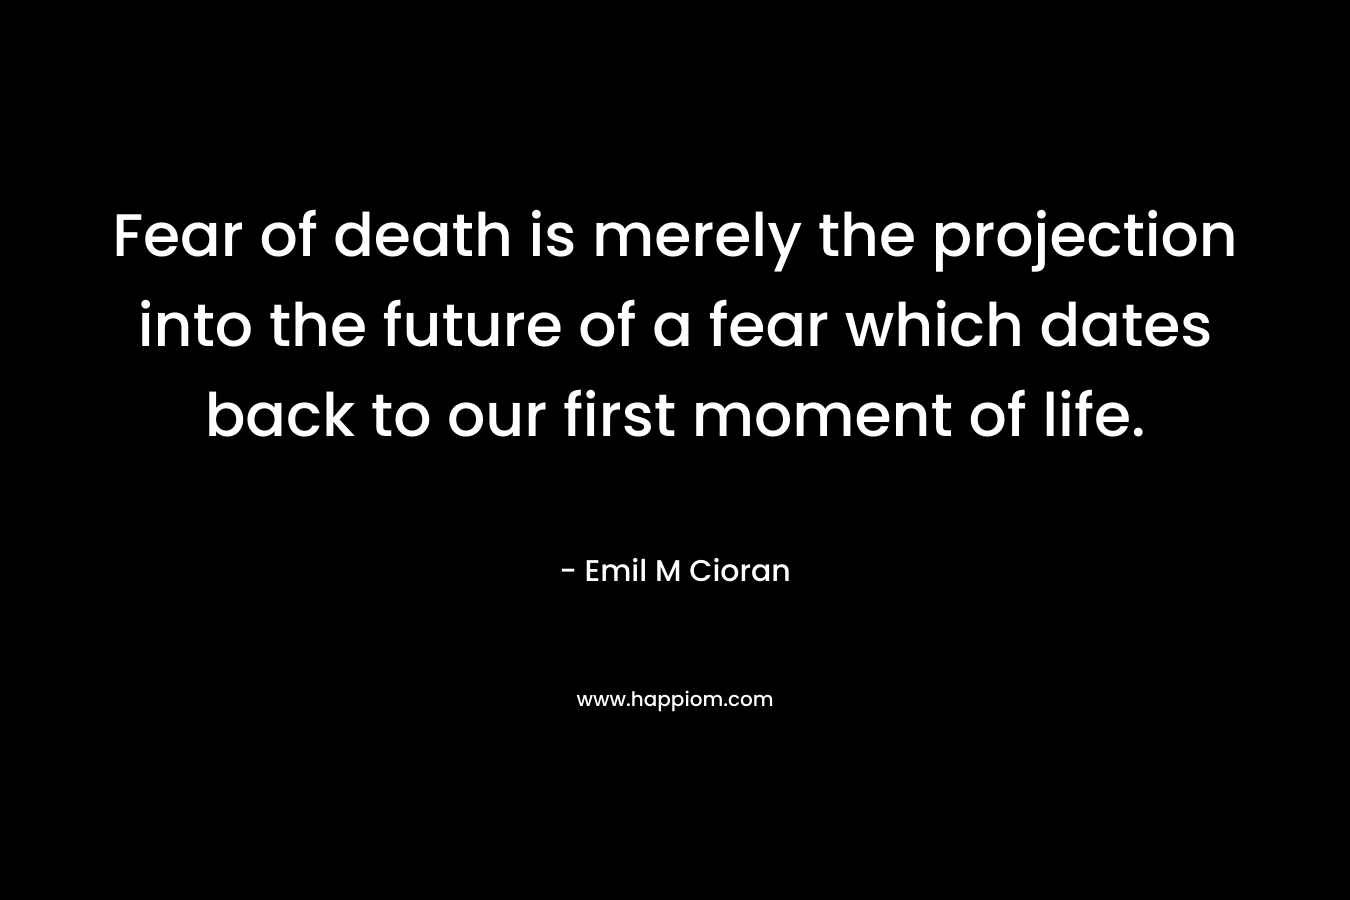 Fear of death is merely the projection into the future of a fear which dates back to our first moment of life.